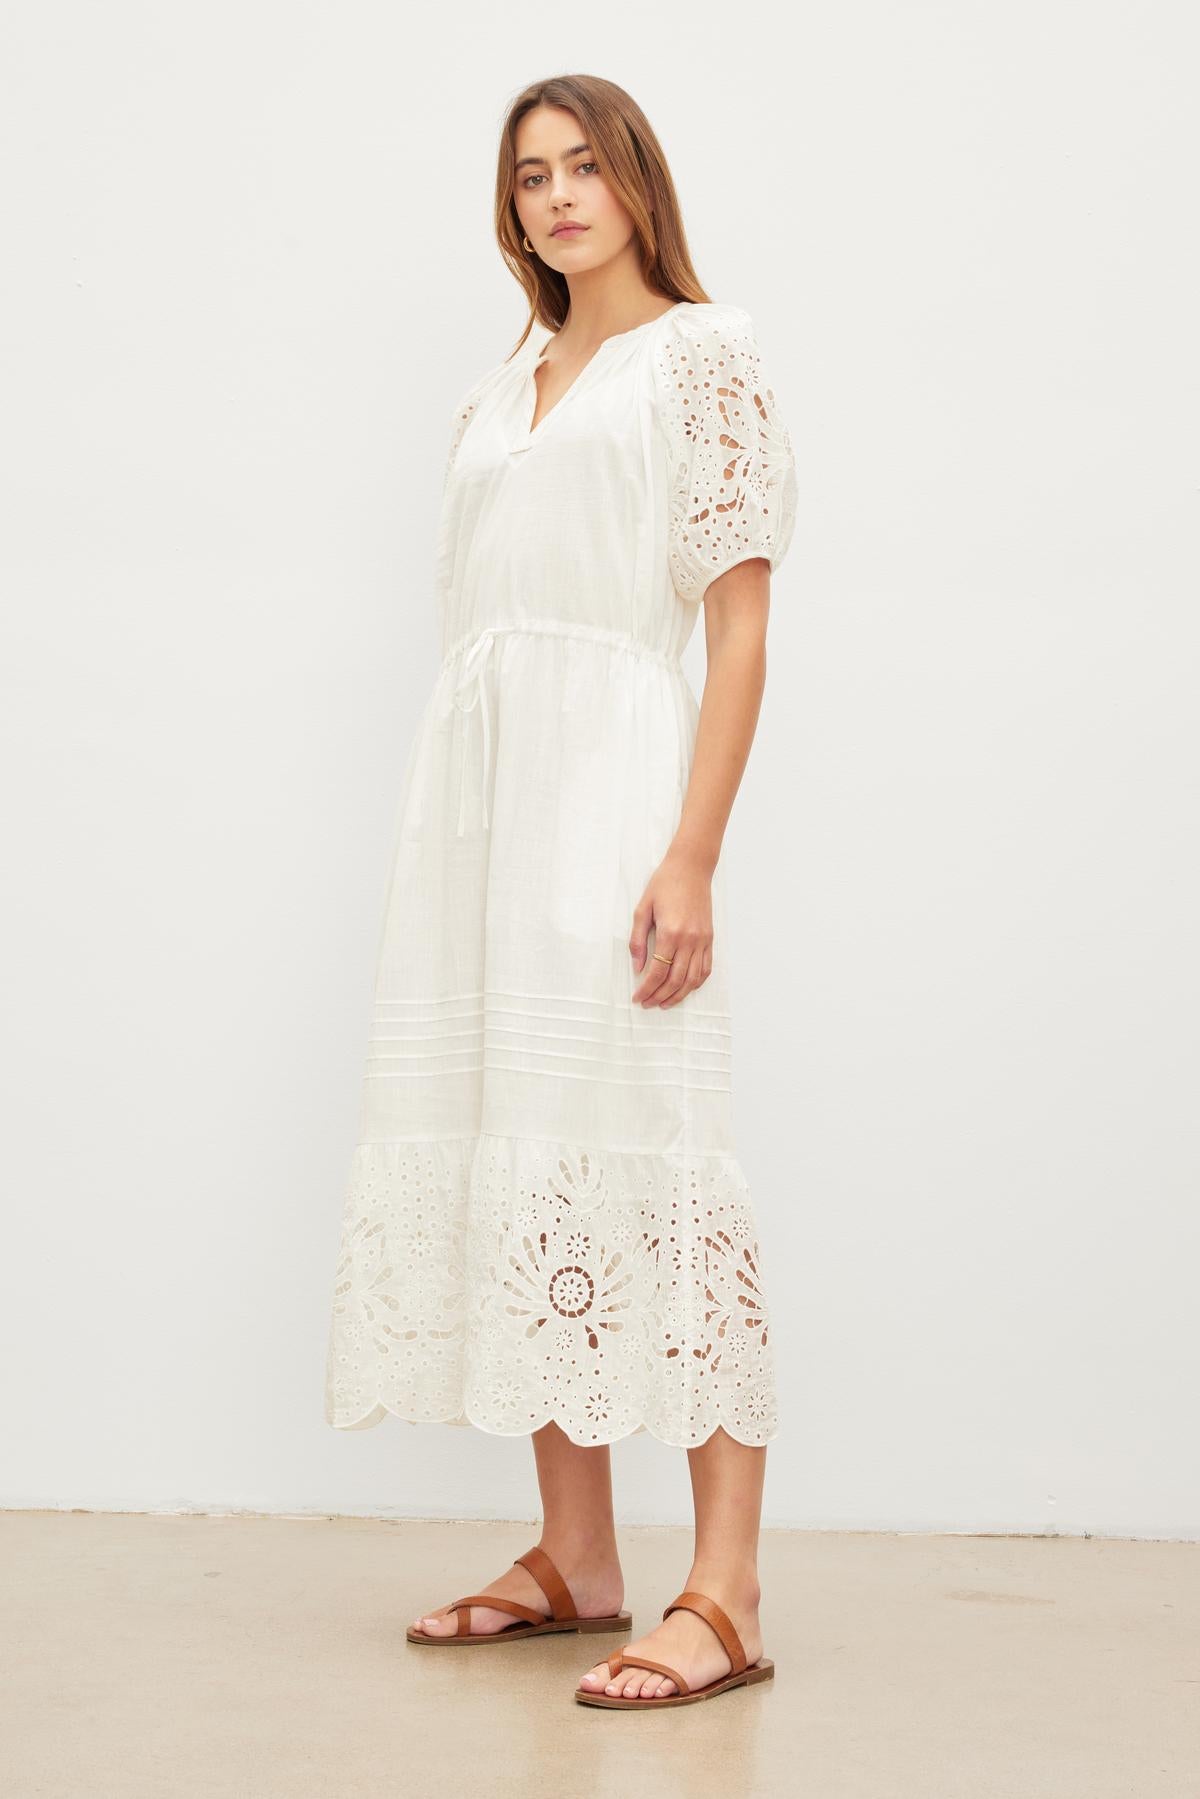 Woman in a white NADIA EMBROIDERED COTTON LACE DRESS with puff sleeves and brown sandals standing against a plain background. (Brand Name: Velvet by Graham & Spencer)-36454007603393